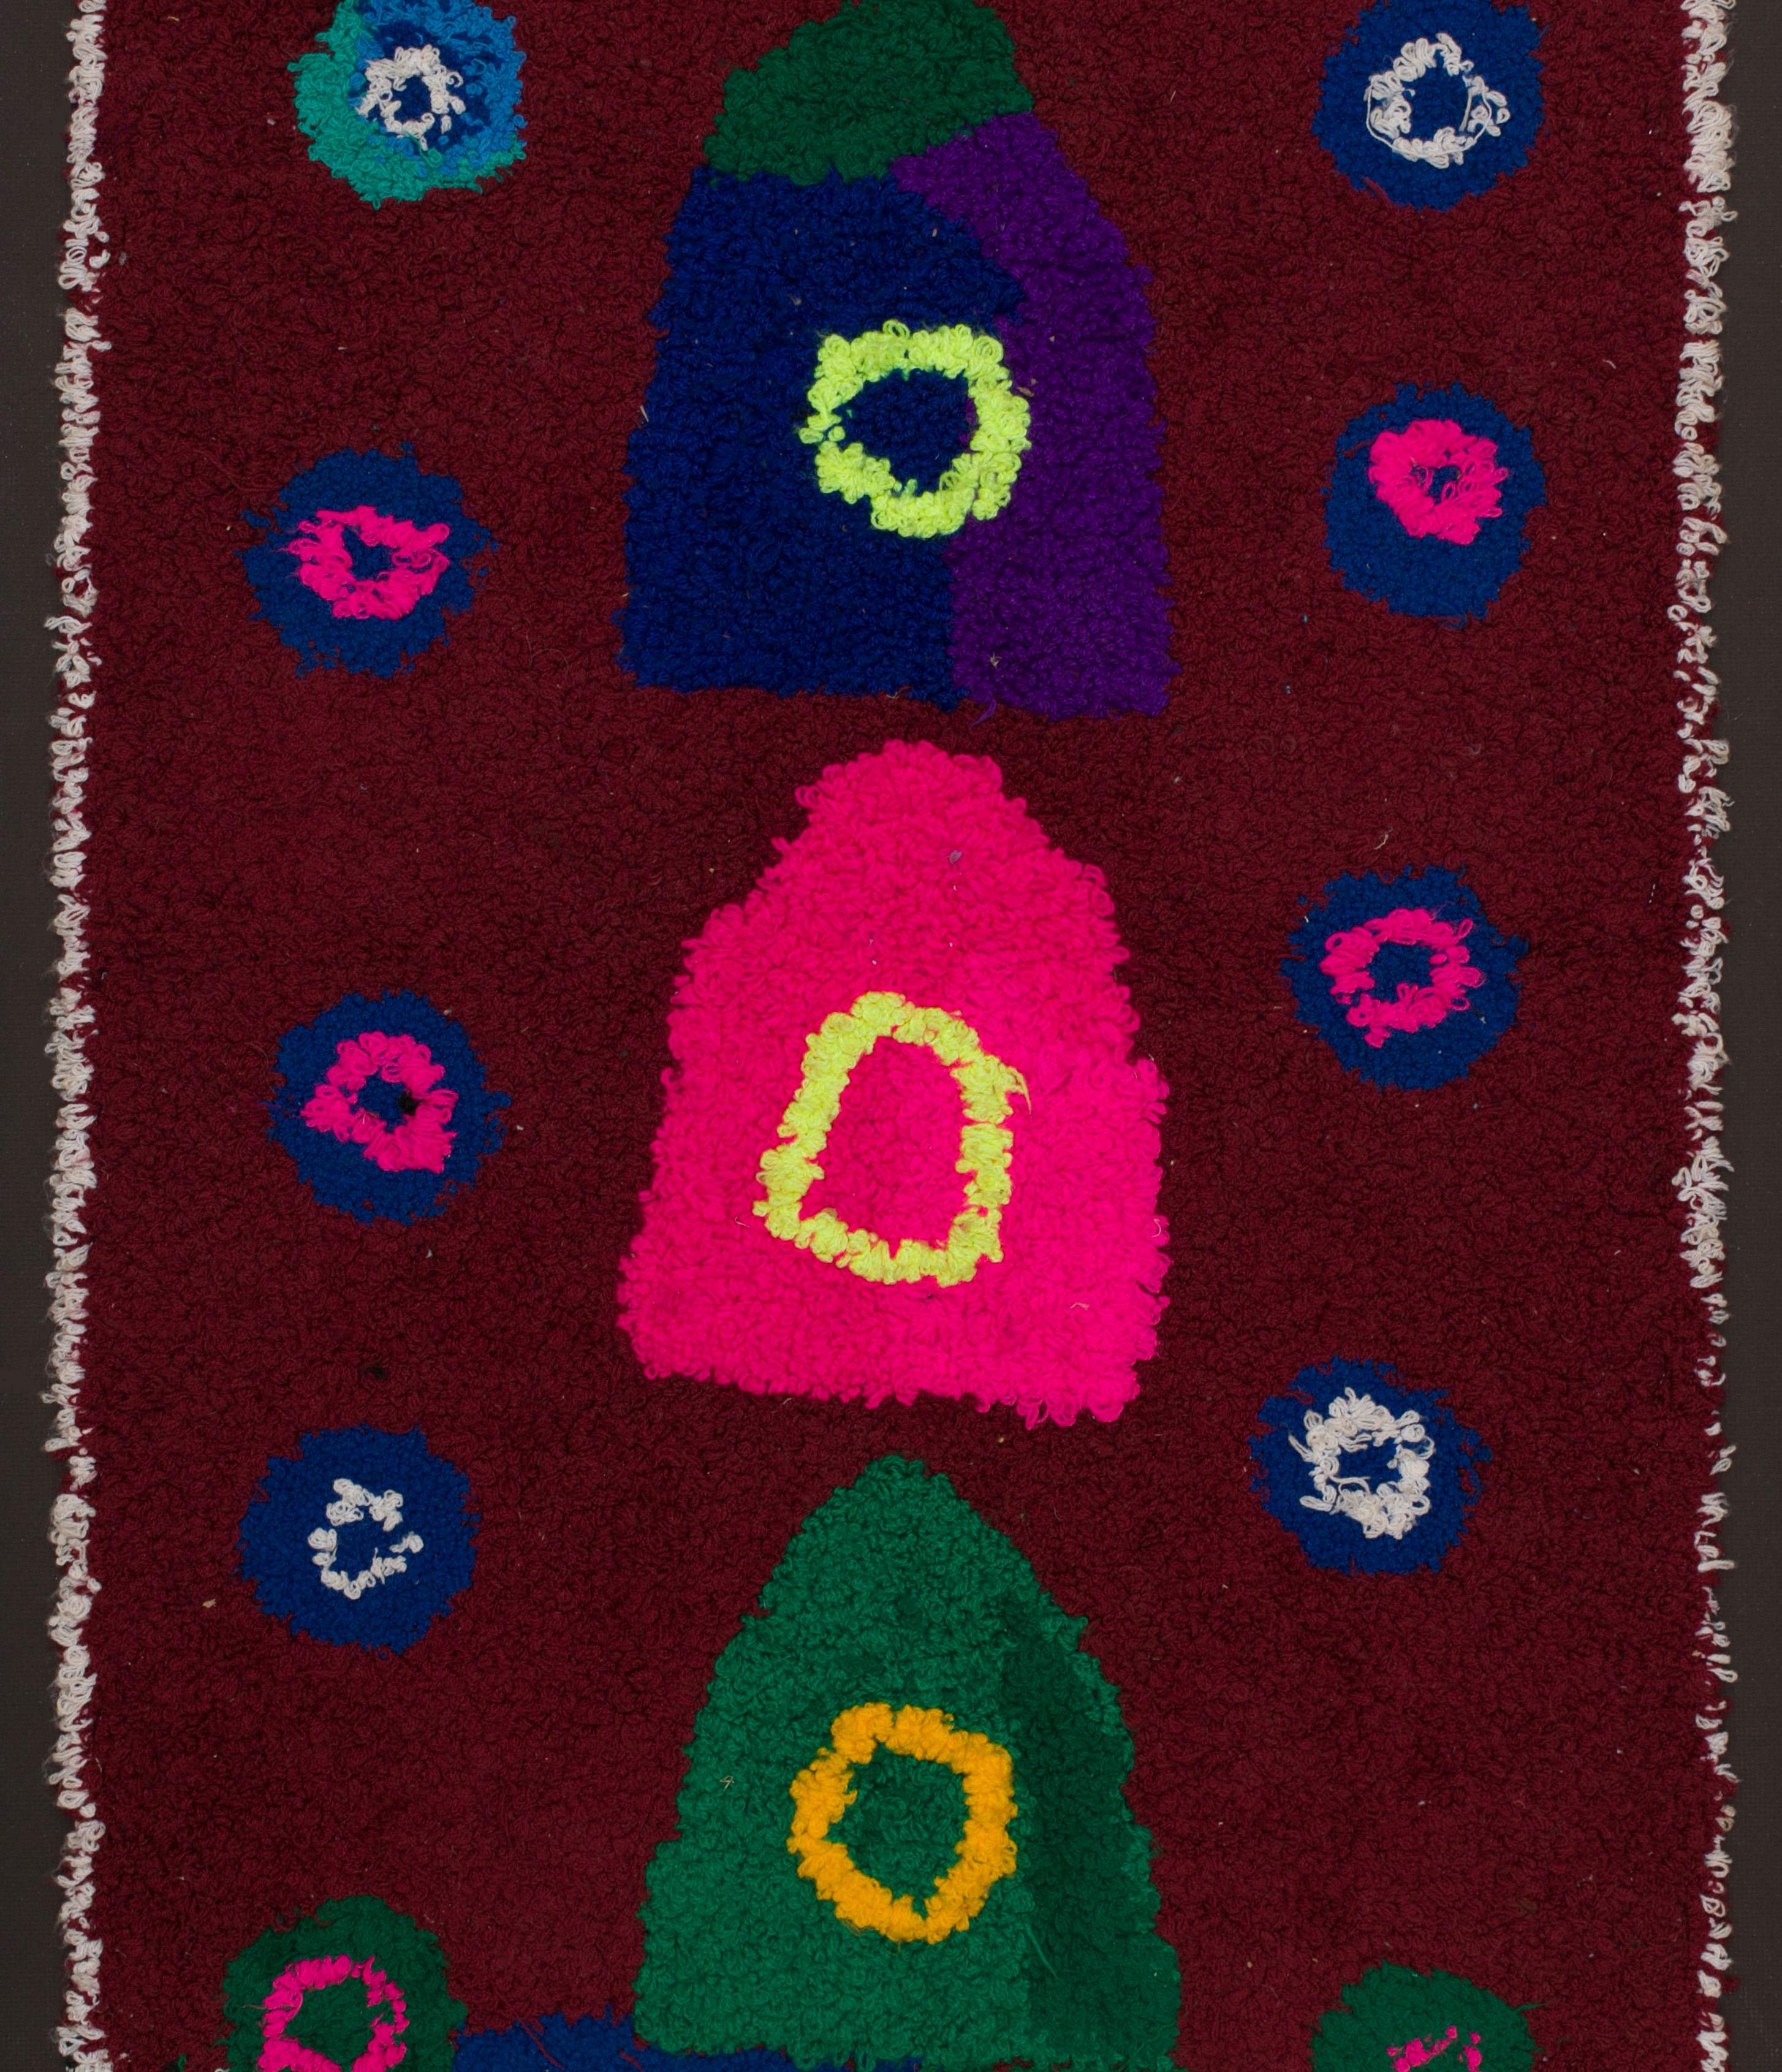 This tapestry was made by Berber women from the Atlas Mountains.
Made from woolen ends and other threads, embroidered on wasted plastic bags of cereals, this unique and vintage work is the demonstration of the secret transmitted from mother to